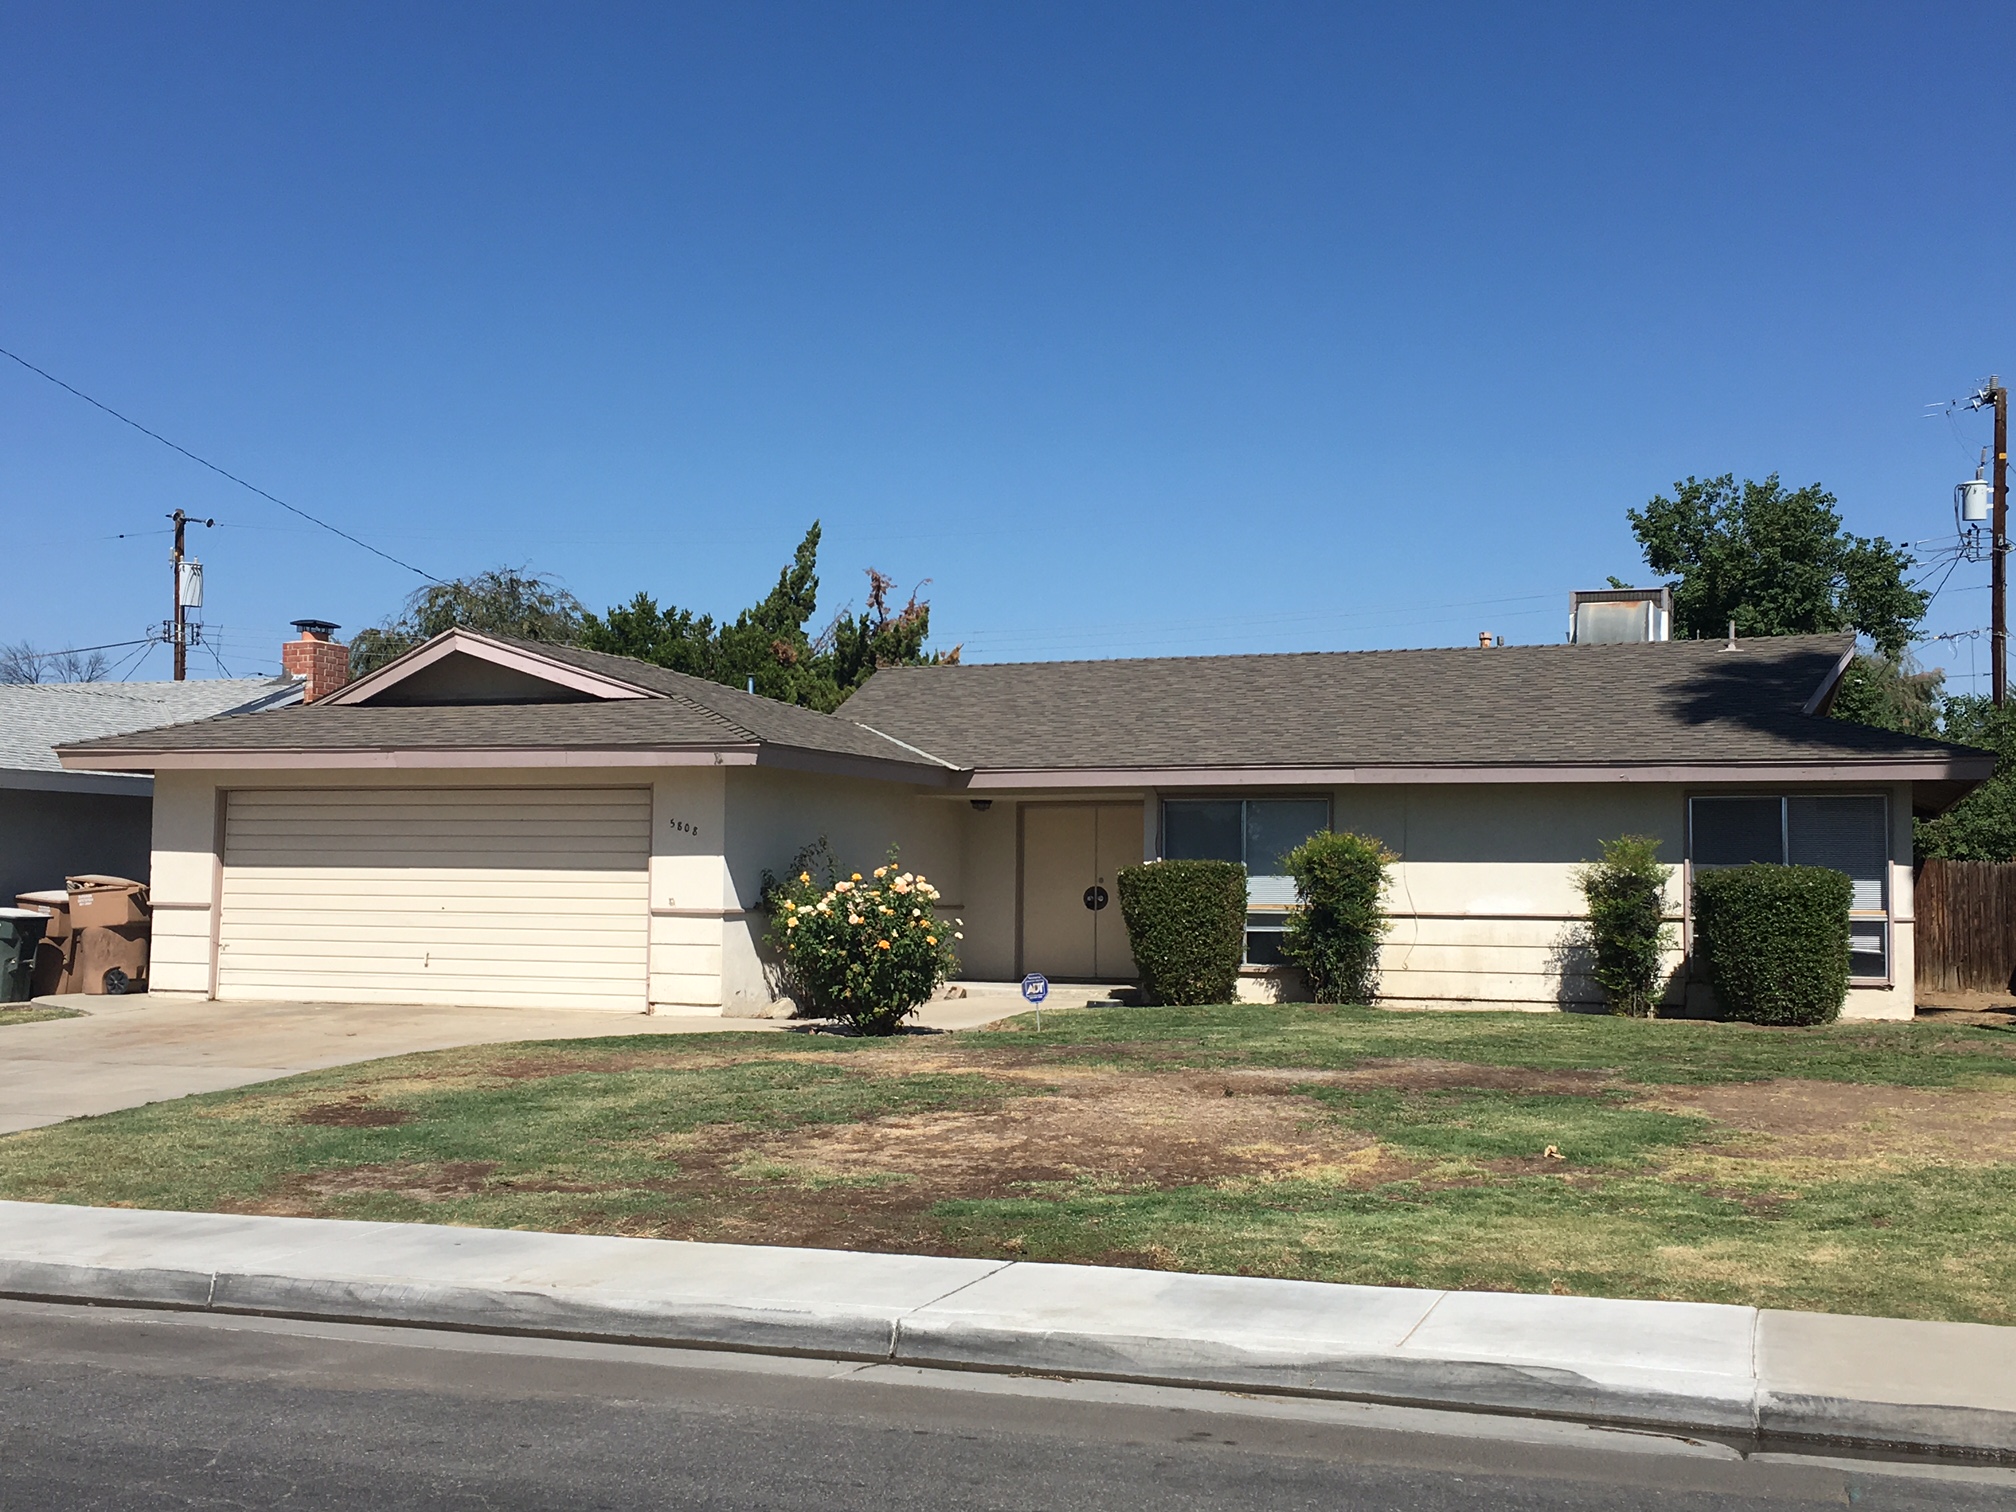 $1250 - 5808 Kleinpell Ave., Bakersfield, CA 93309 Southwest Home HAS BEEN ...